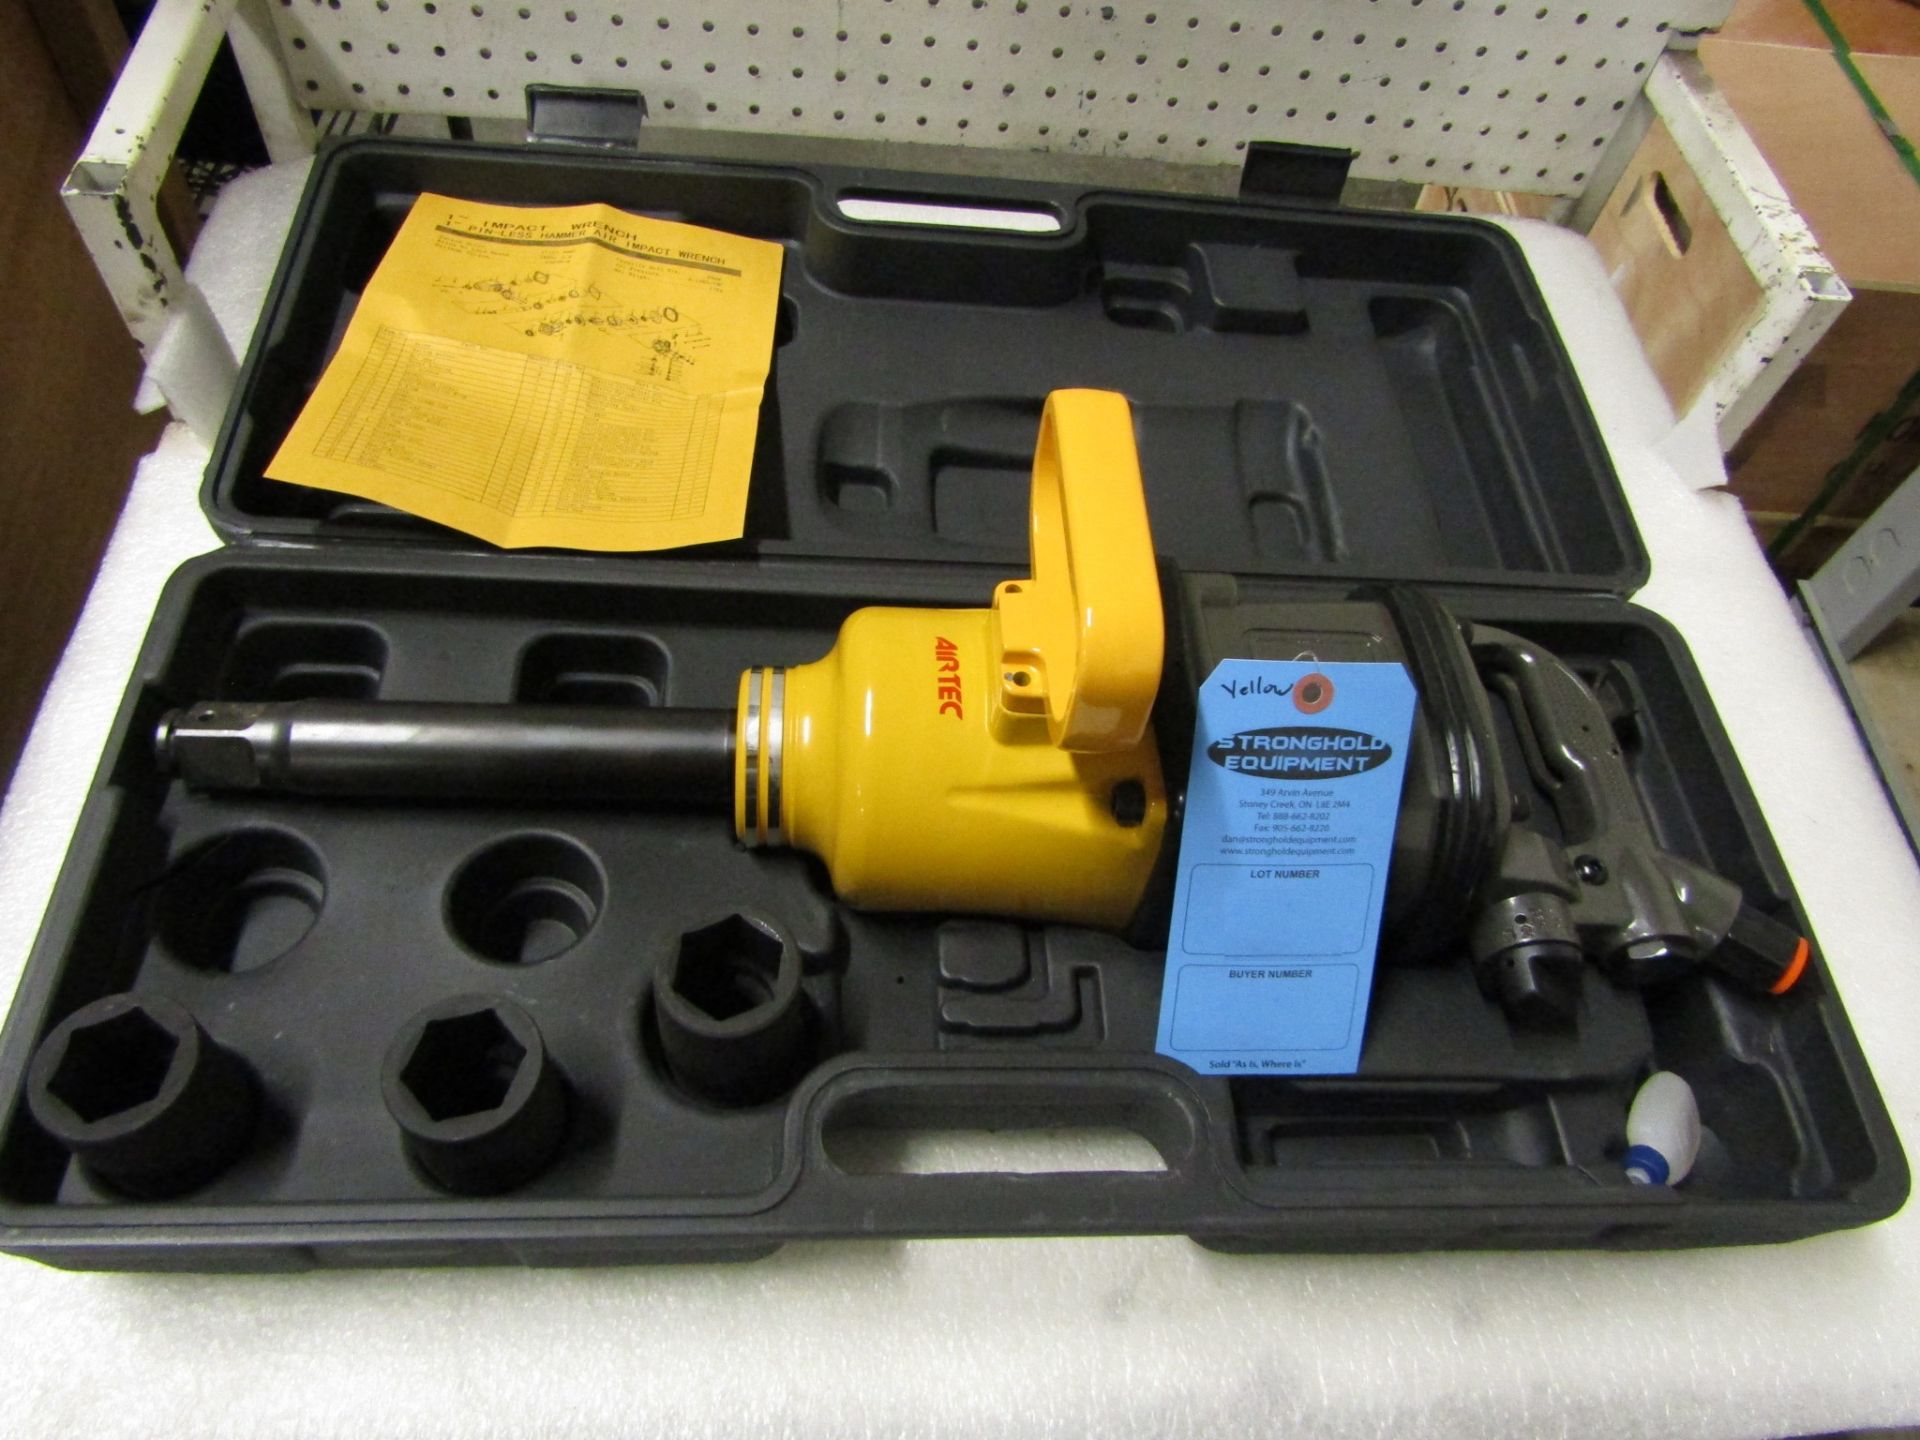 Extended Reach 1" Drive Air Impact Wrench - MINT UNUSED impact gun complete with sockets in